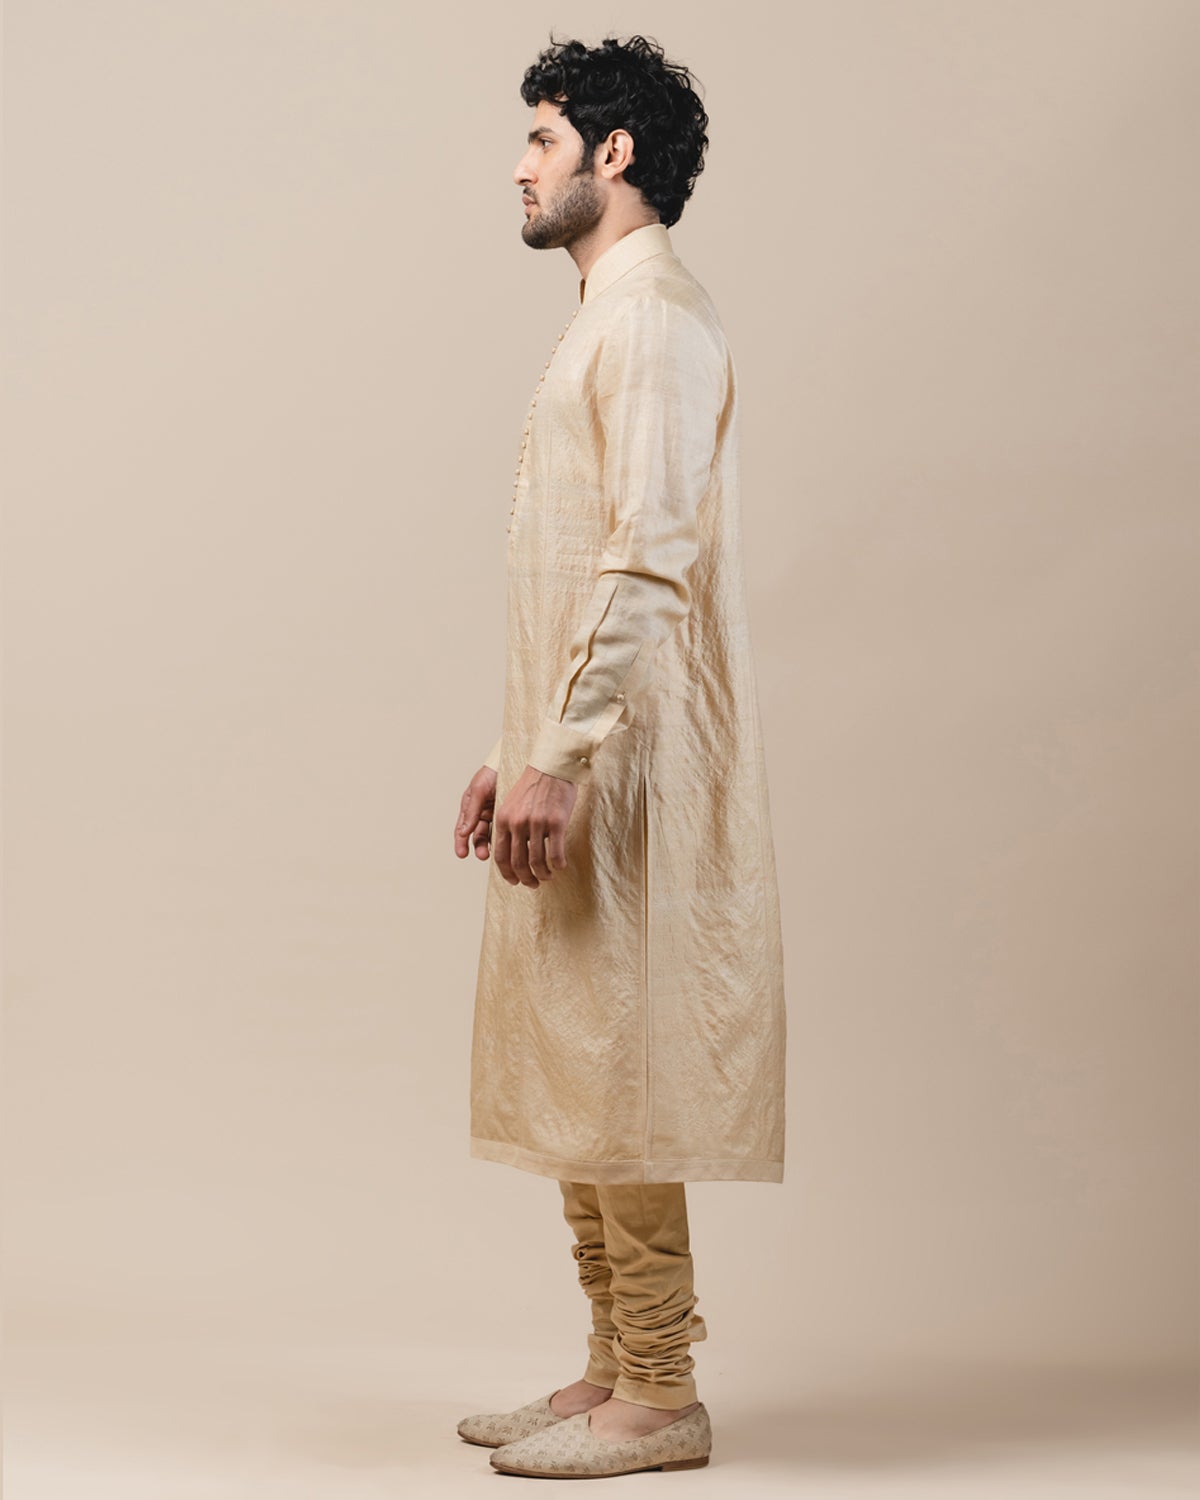 Classic Gold Silk Kurta Set Indian Clothing in Denver, CO, Aurora, CO, Boulder, CO, Fort Collins, CO, Colorado Springs, CO, Parker, CO, Highlands Ranch, CO, Cherry Creek, CO, Centennial, CO, and Longmont, CO. NATIONWIDE SHIPPING USA- India Fashion X